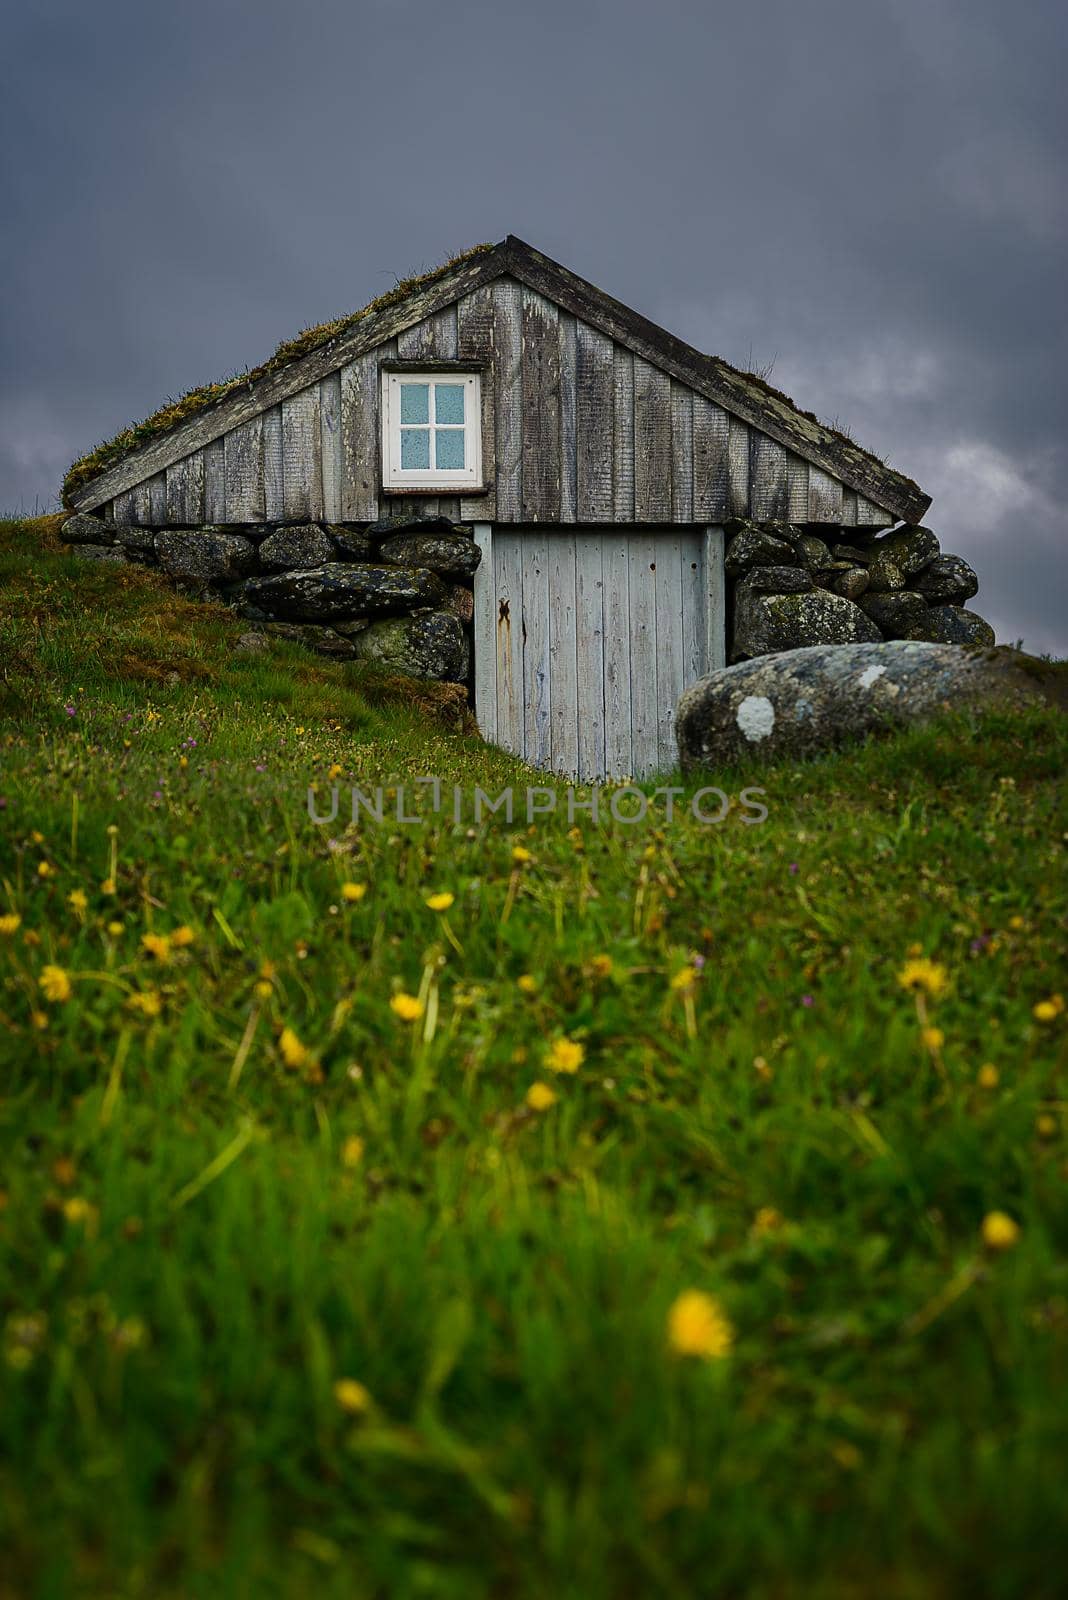 Old outhouse next to main house. Not in use today, is more of a museum object. Called 'Træet på Line'. Nice colors during the spring time, dark clouds in the horizon.